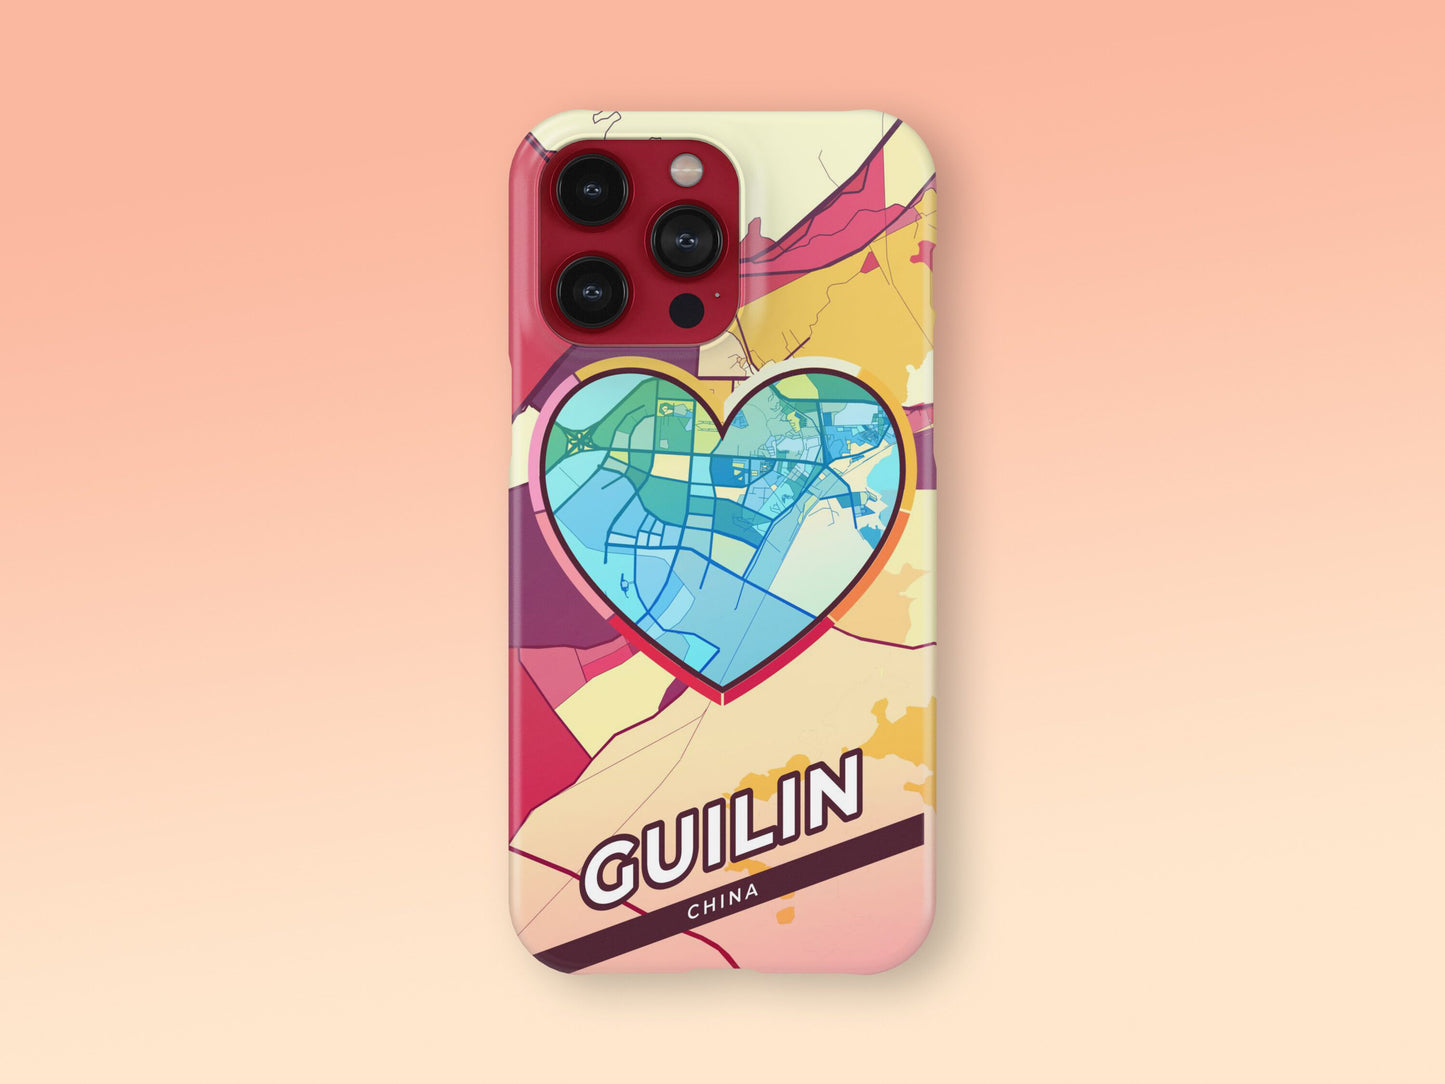 Guilin China slim phone case with colorful icon. Birthday, wedding or housewarming gift. Couple match cases. 2